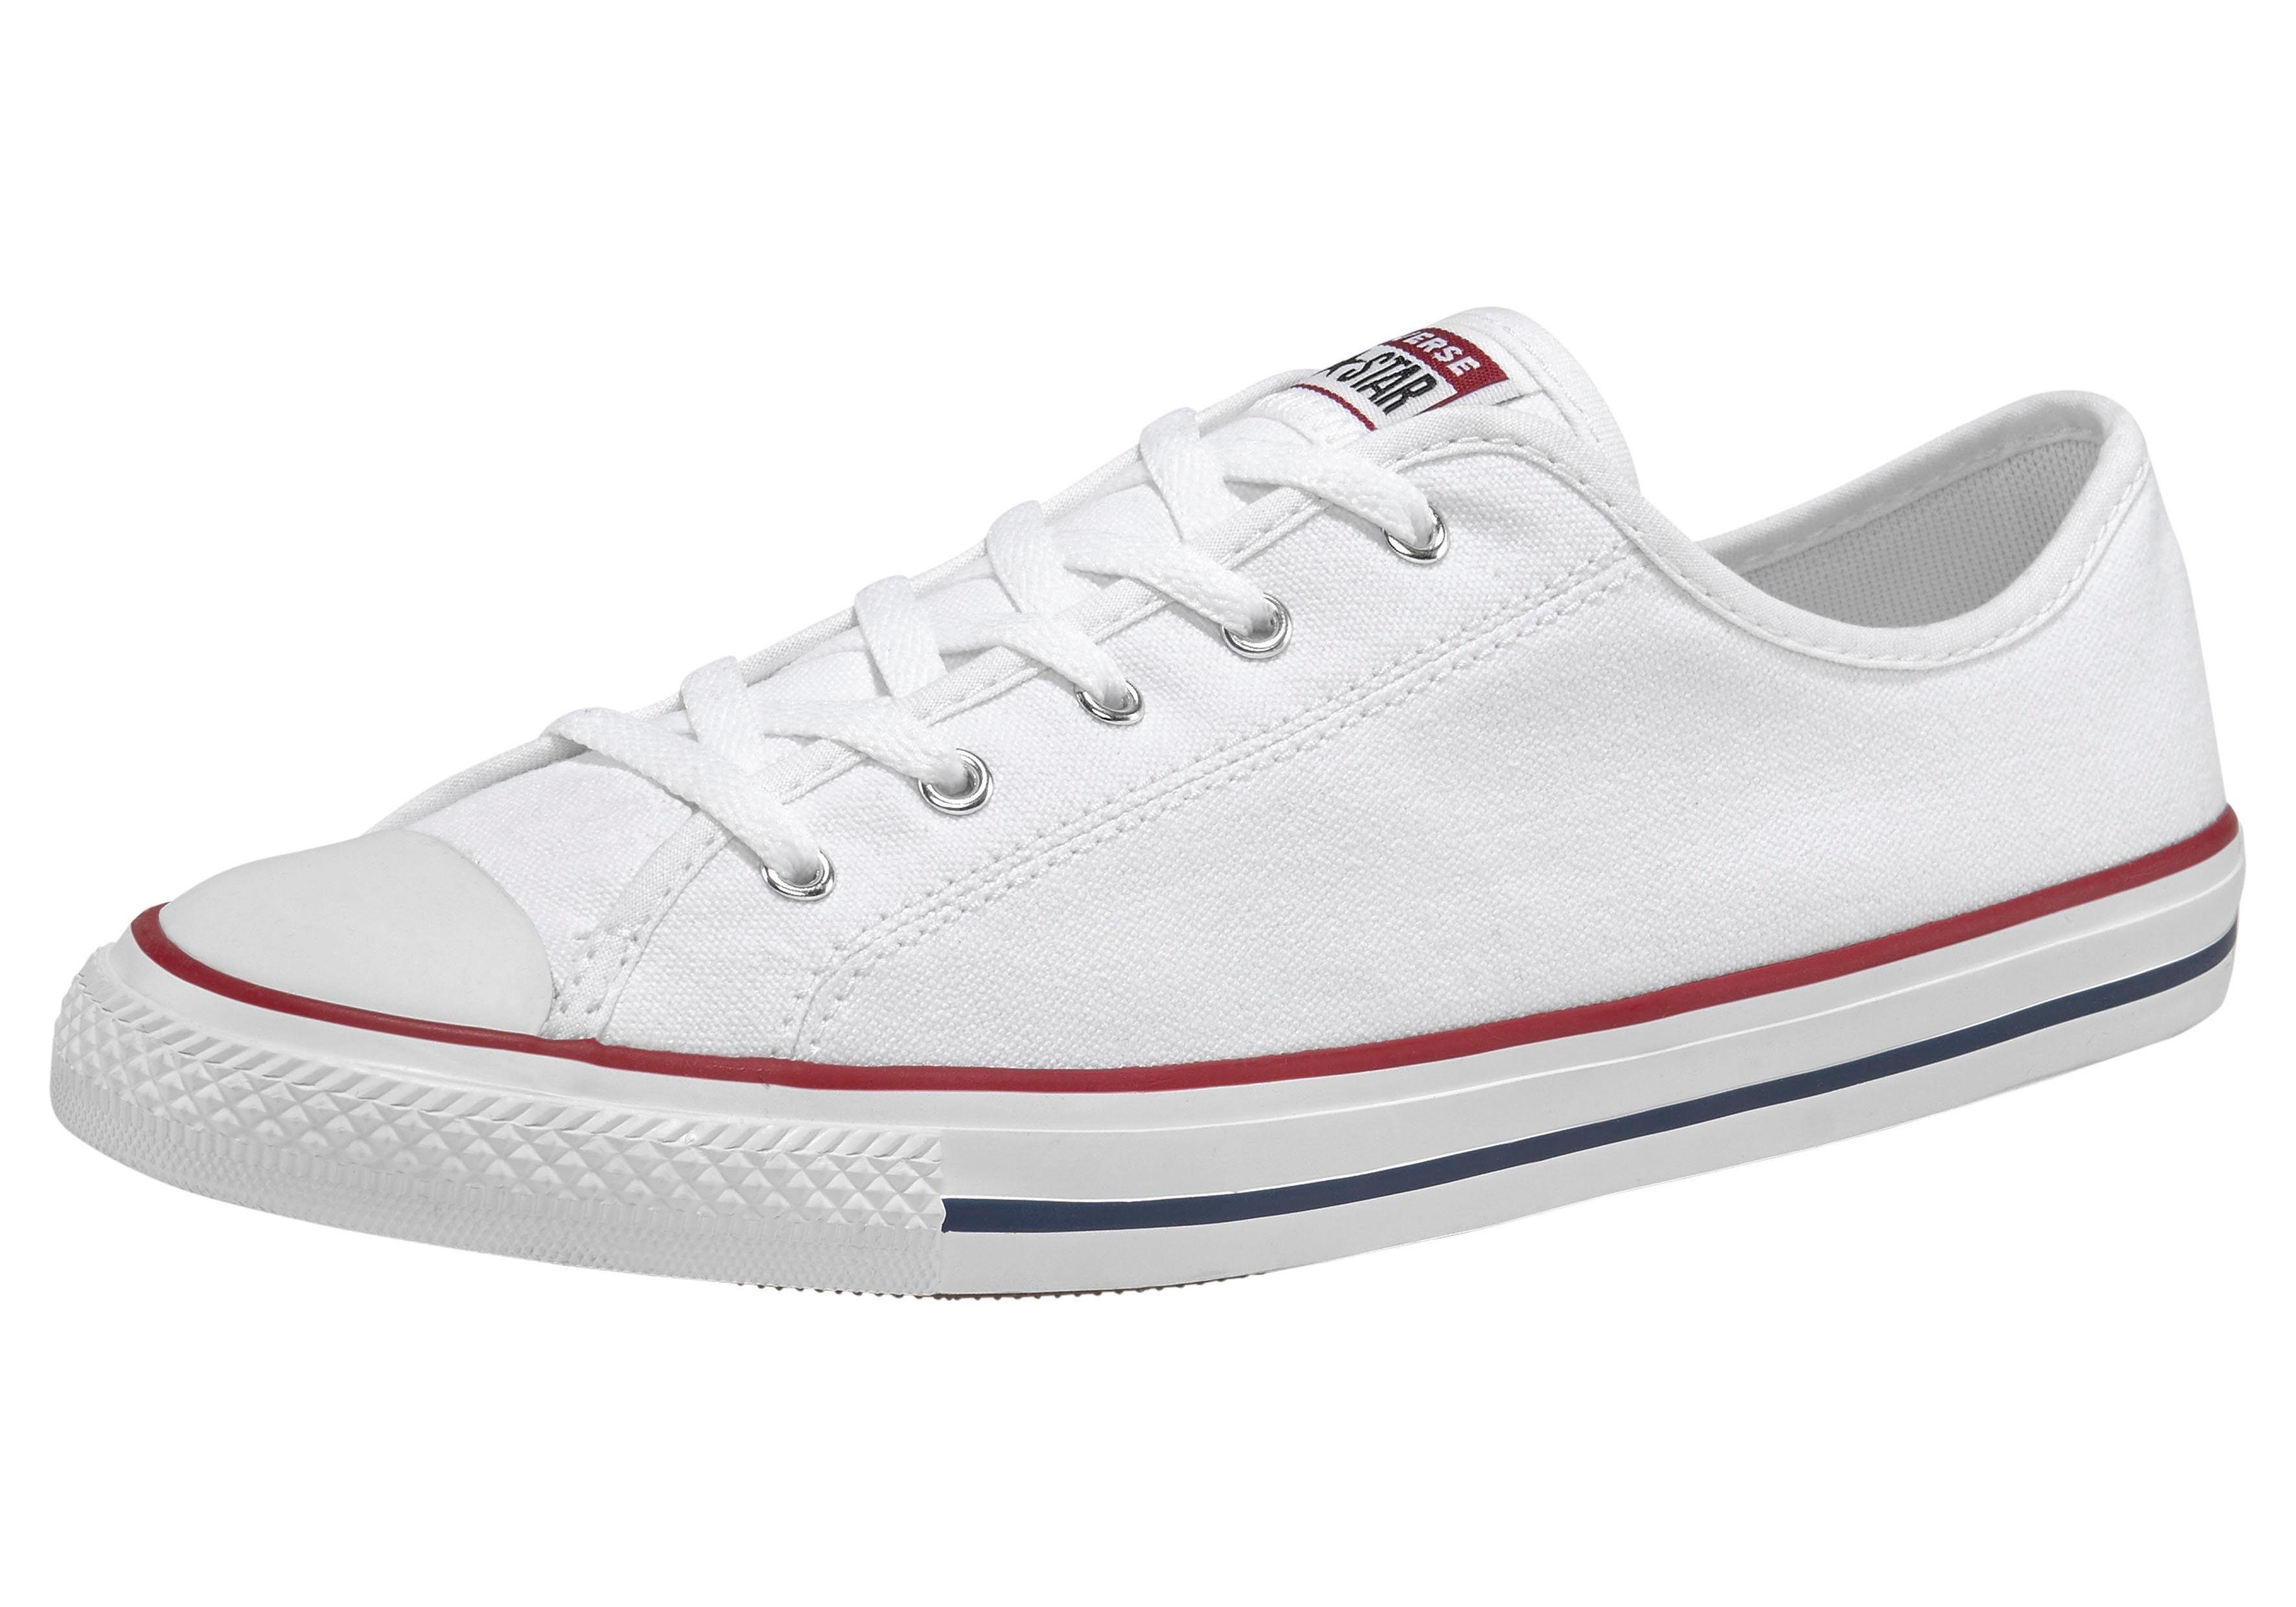 Arctic kleermaker matchmaker Converse Sneakers Chuck Taylor All Star Dainty GS Basic On Ox in de online  winkel | OTTO